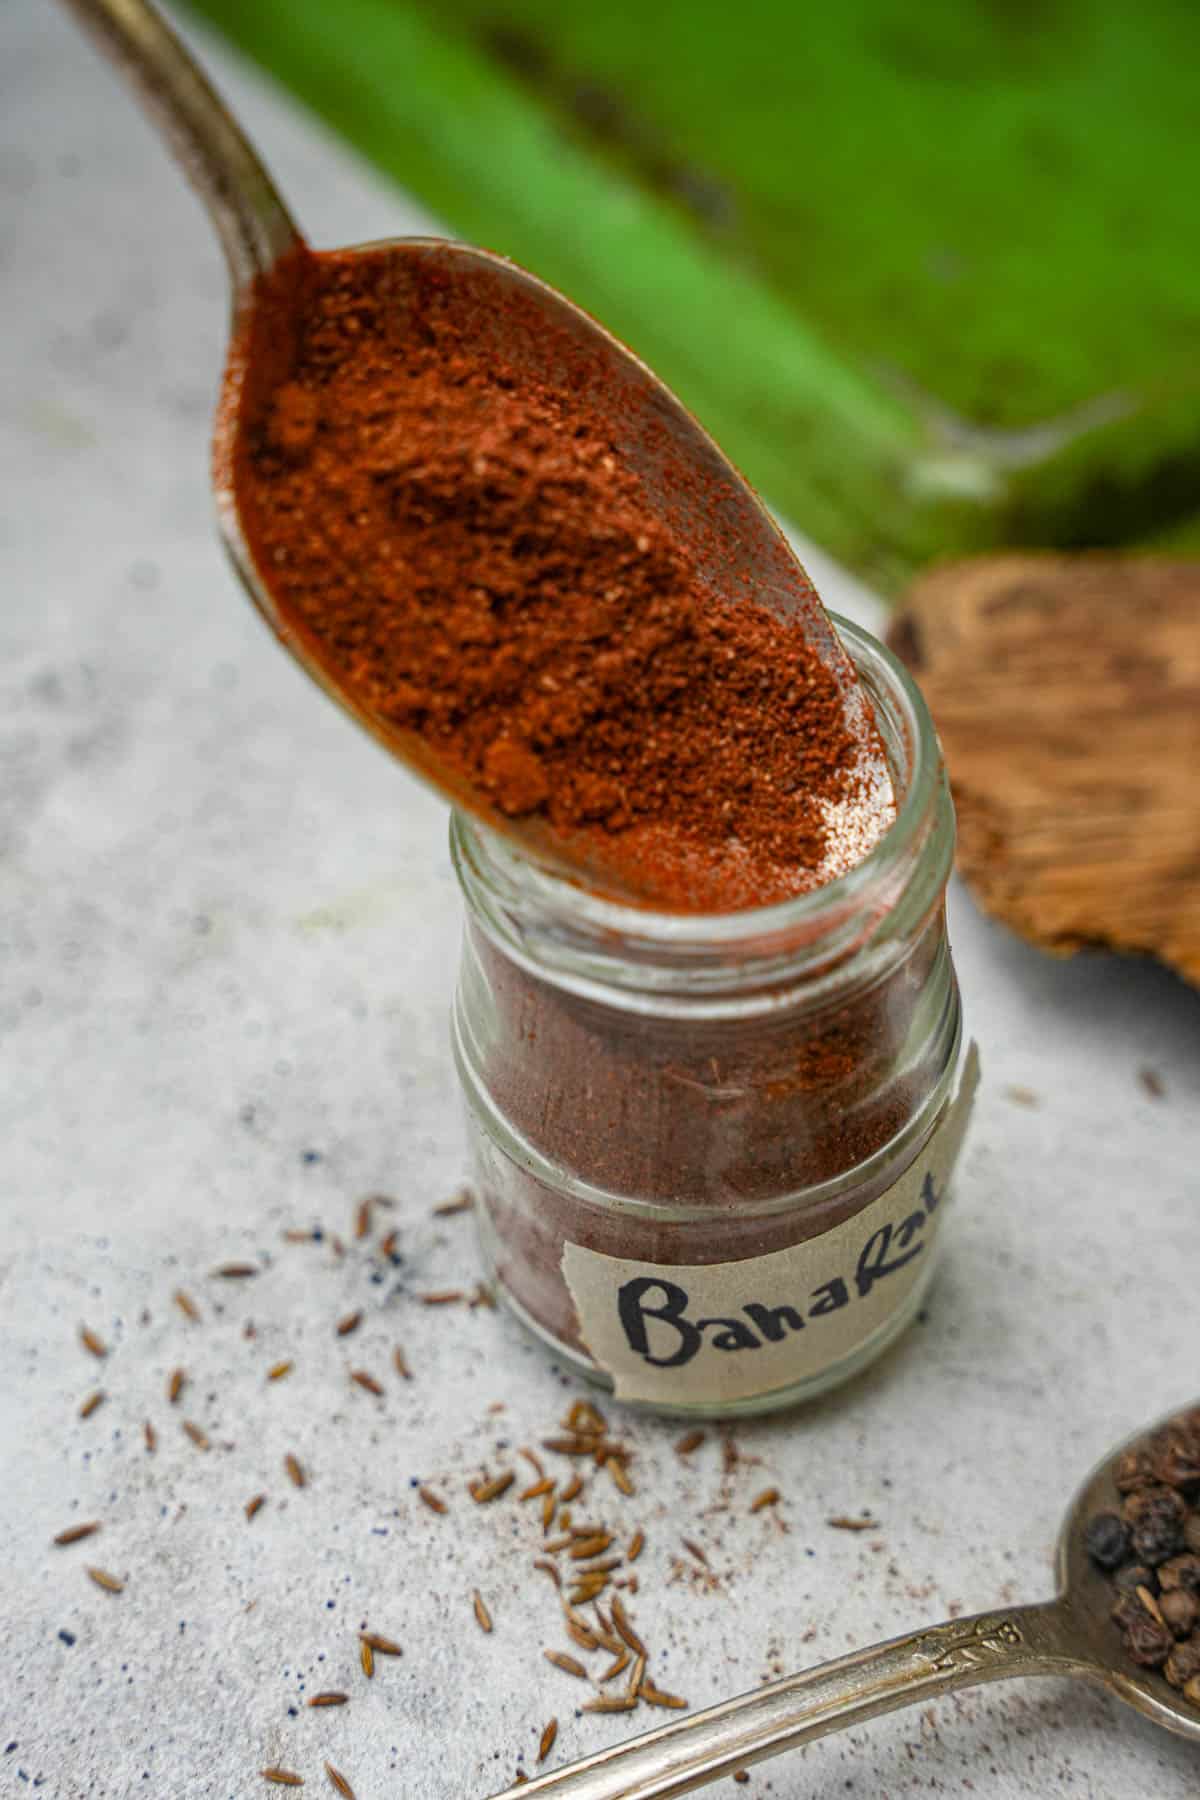 Spices being loaded into a labeled jar with a spoon.